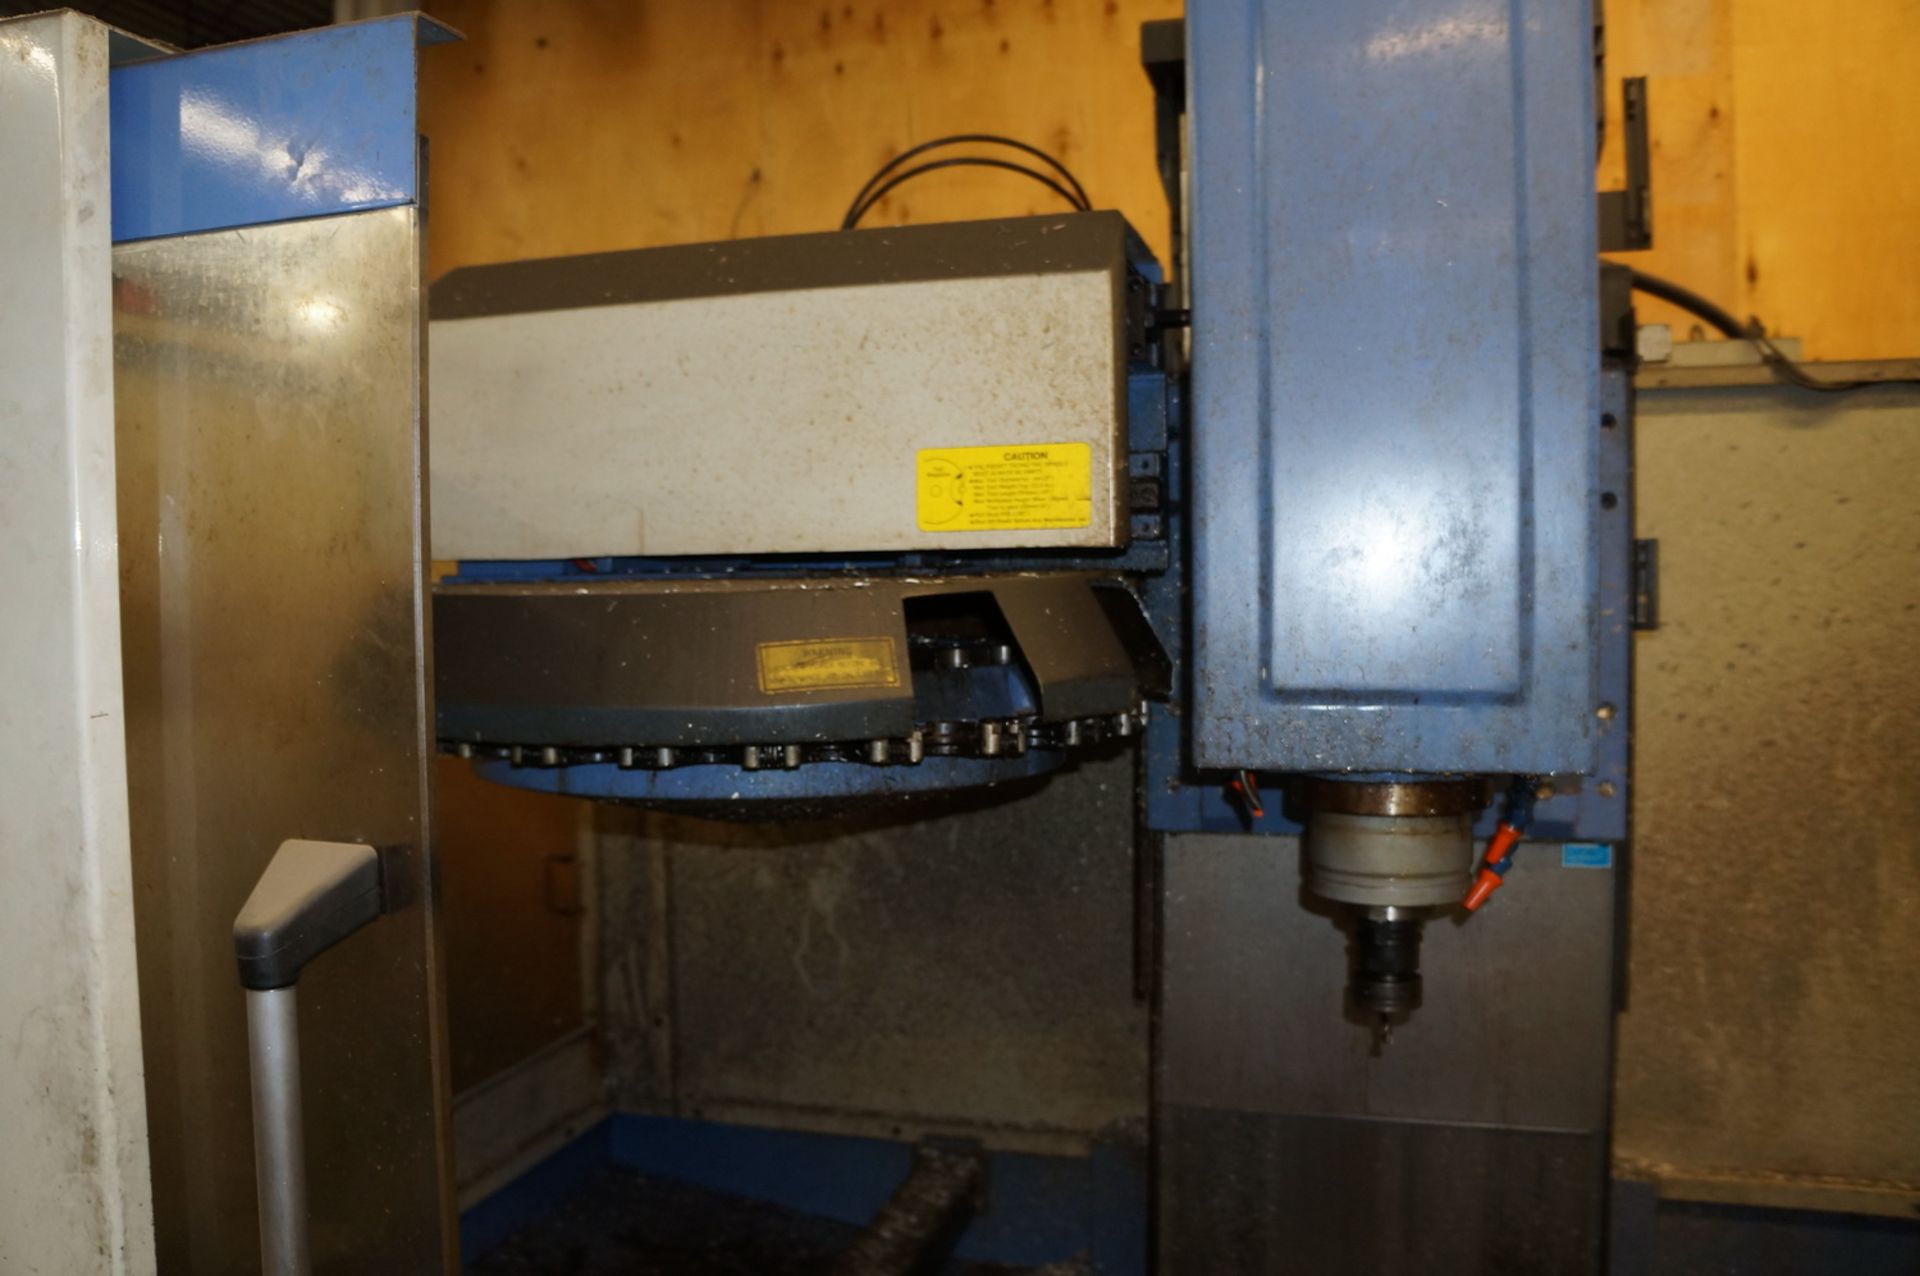 LEADWELL MCV-1000AP CNC VERTICAL MACHINING CENTER, FANUC OM CONTROL, 20? X 47? TABLE, NO. 40 - Image 2 of 4